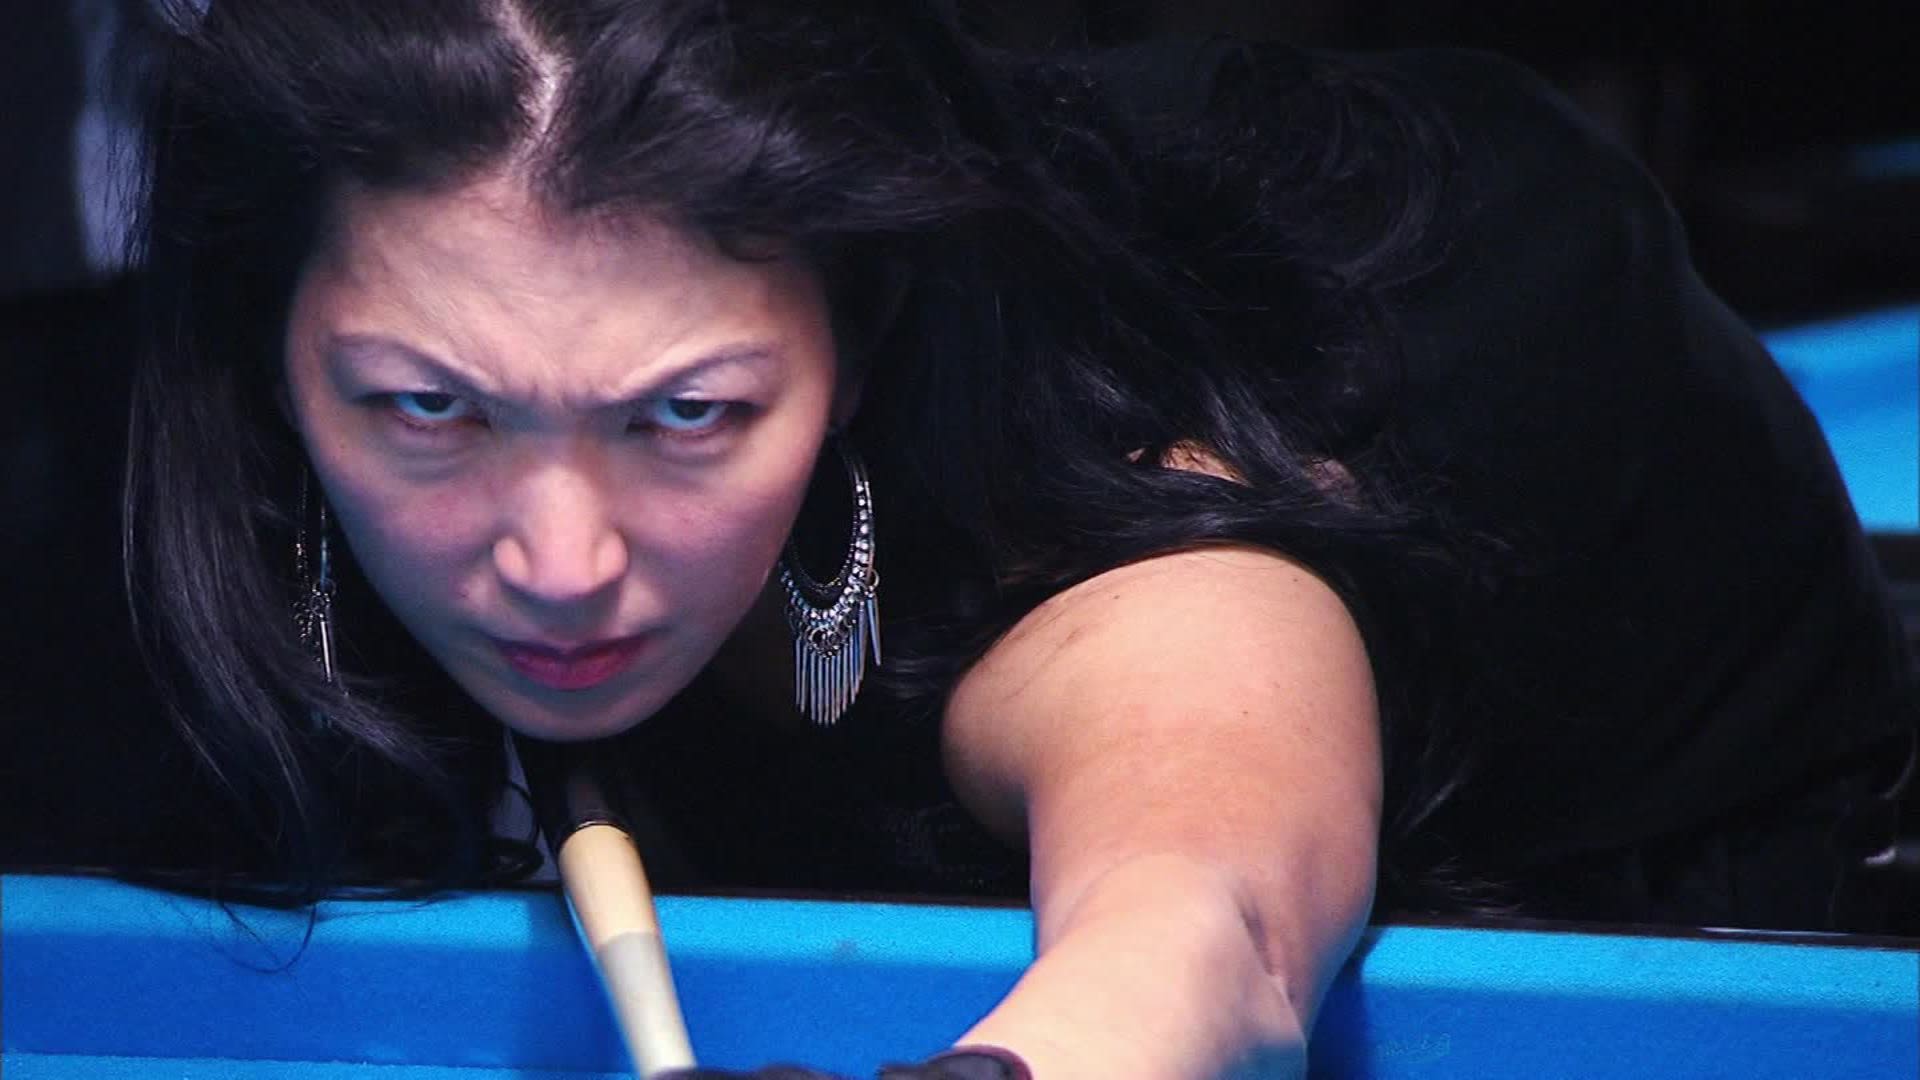 Jeannette Lee, champion pool player, turns pain into power | CNN